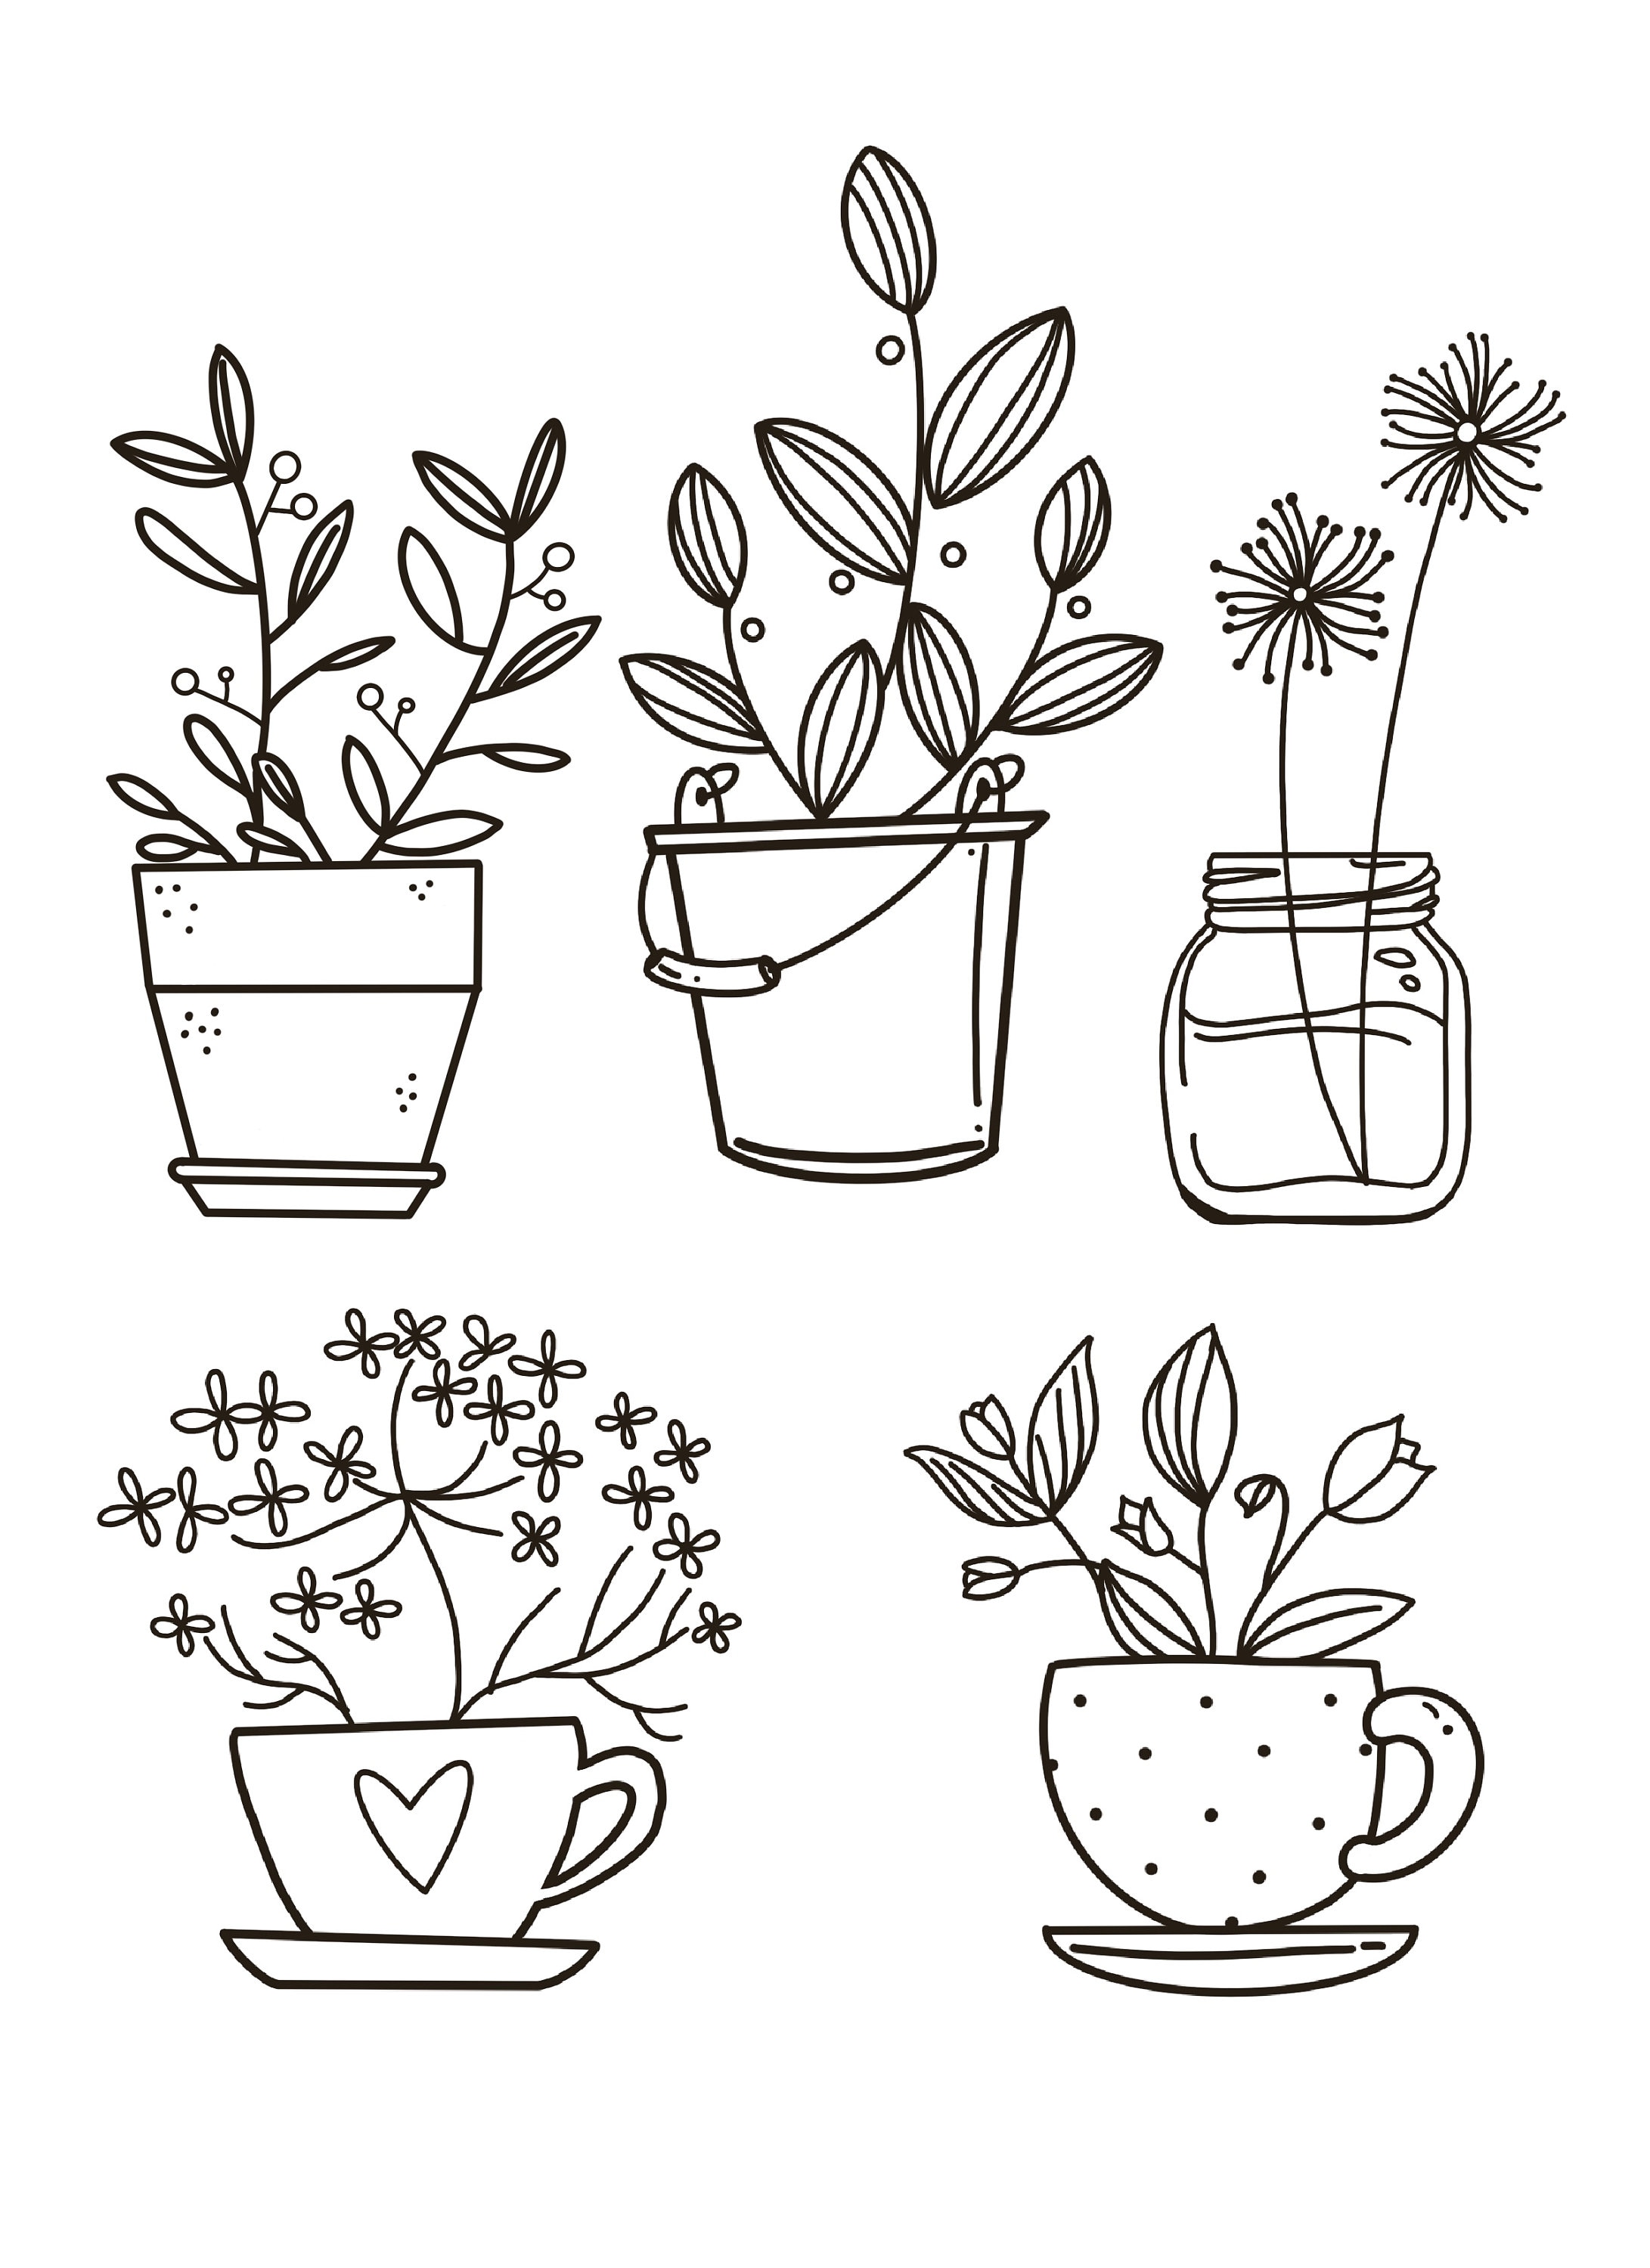 Plant coloring pages coloring page downloadable coloring page